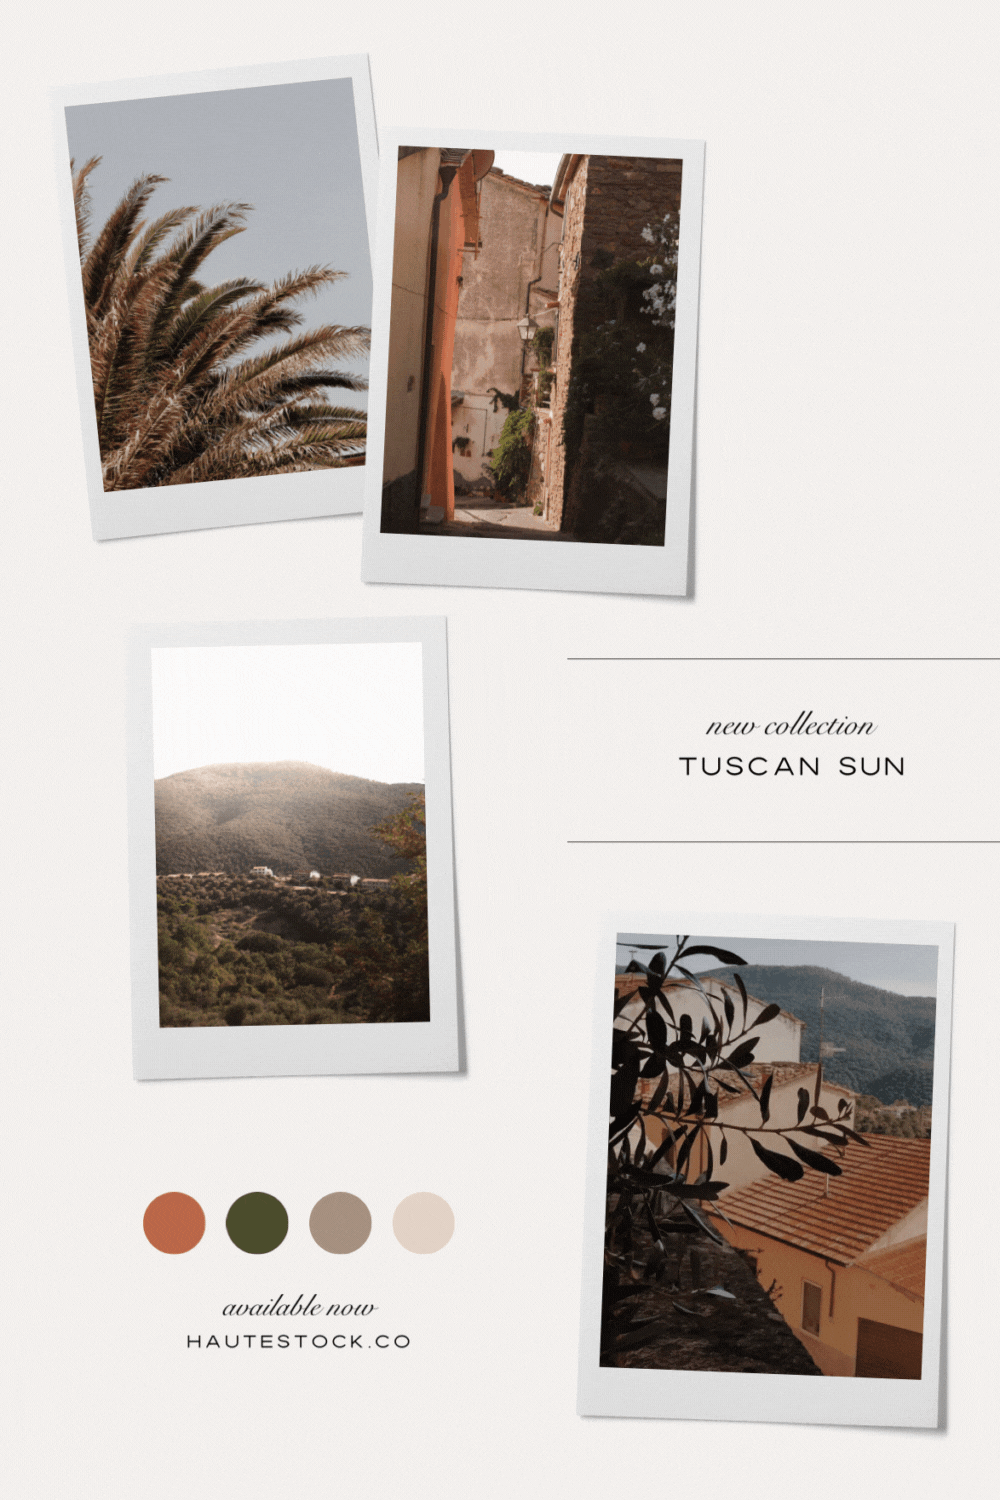 Mood Board for Tuscan sun, a new collection of summer travel photos & videos in Tuscan countryside and sandy beaches.